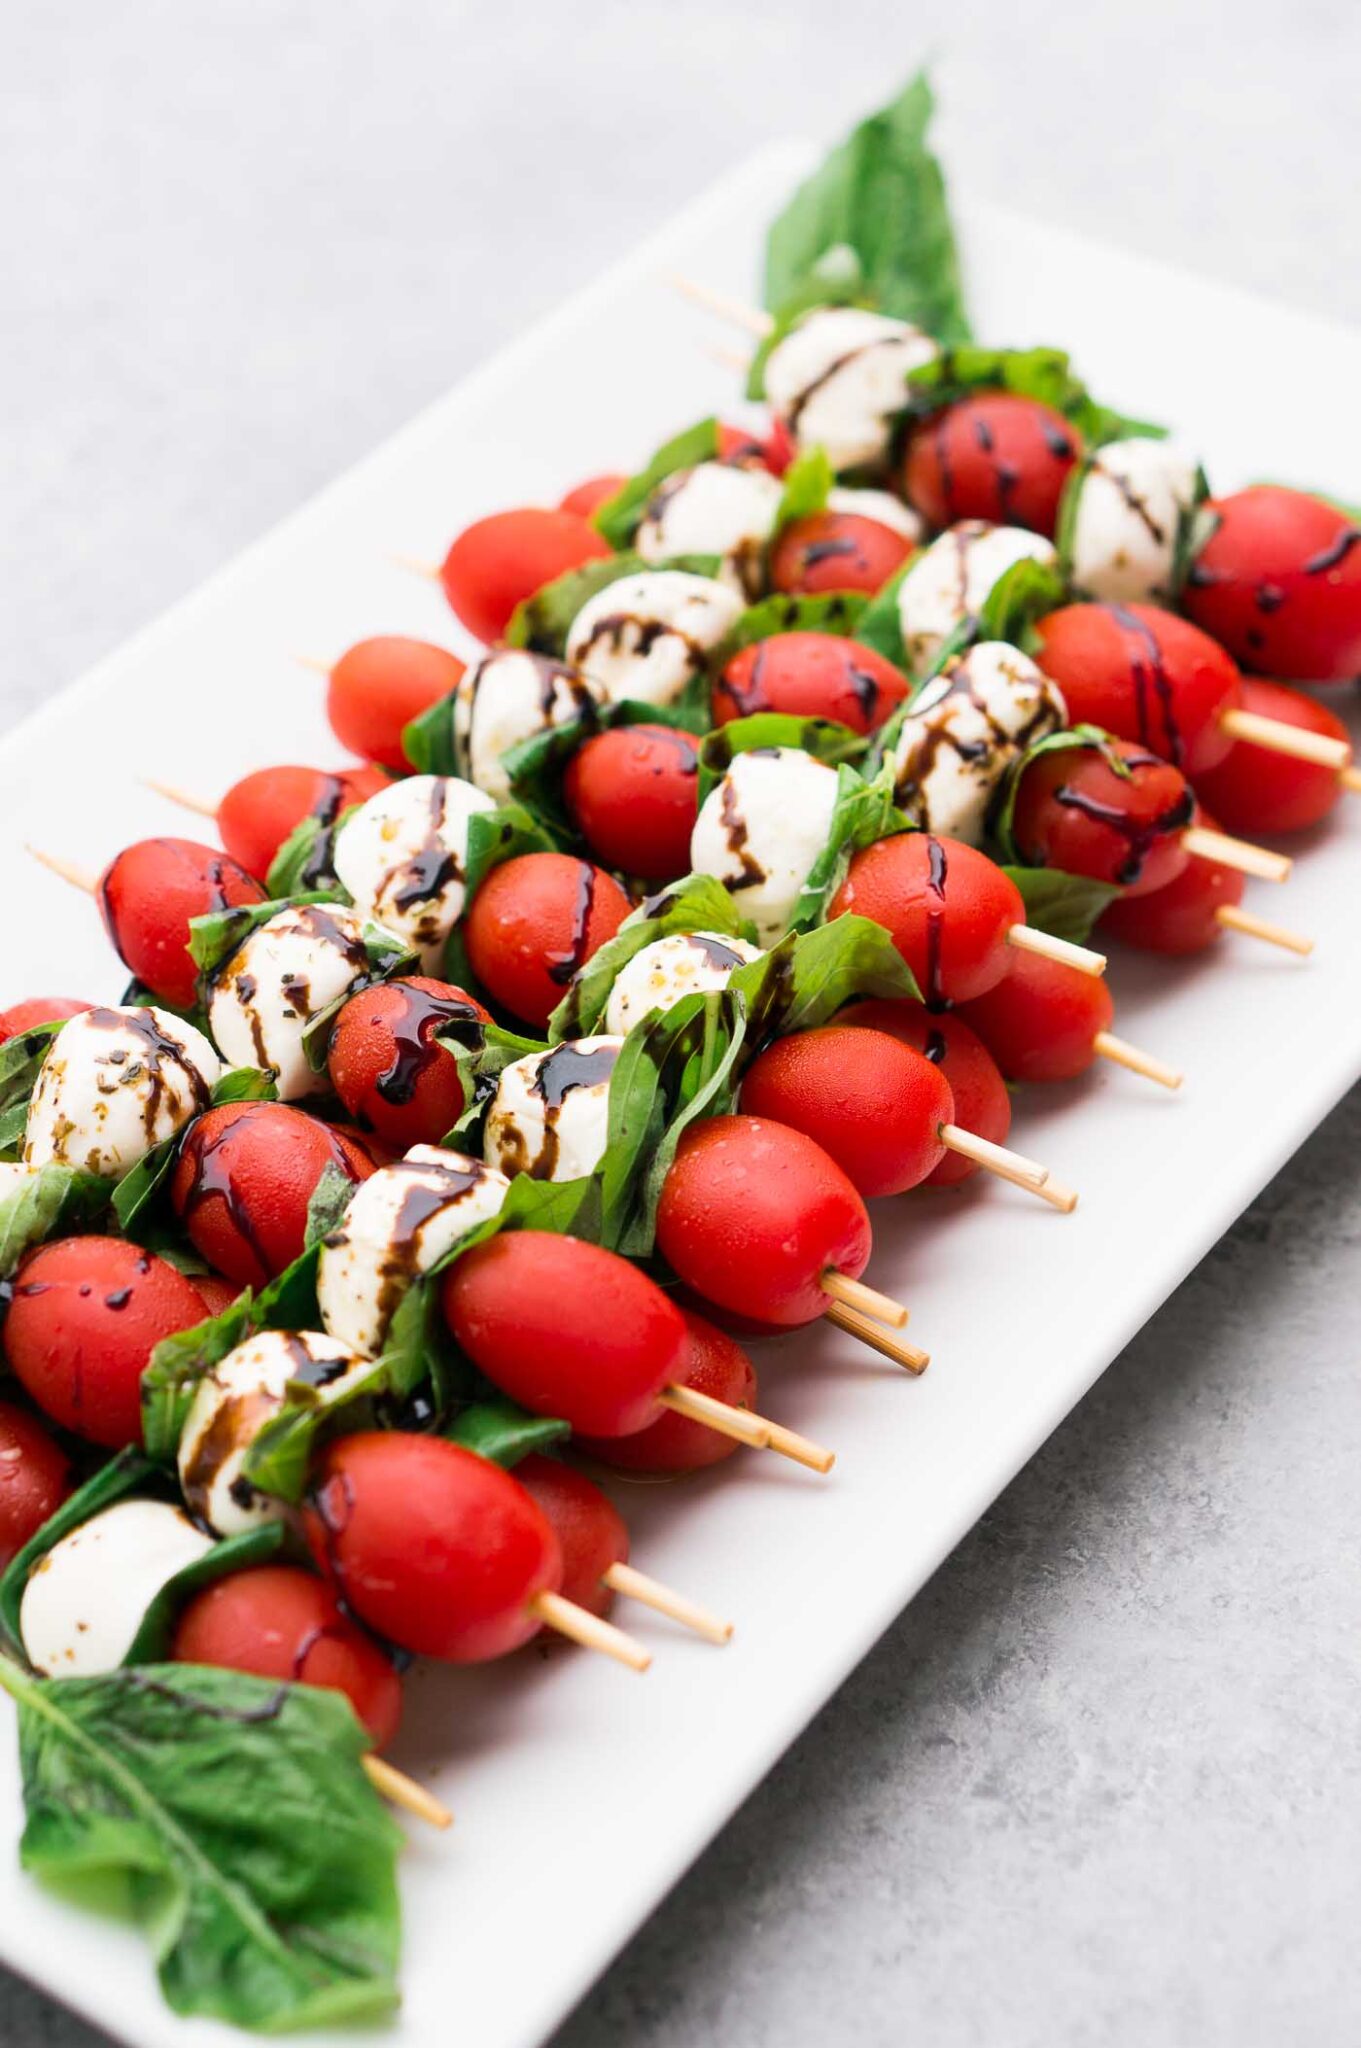 Caprese Salad skewers with mozzarella balls and grape tomatoes